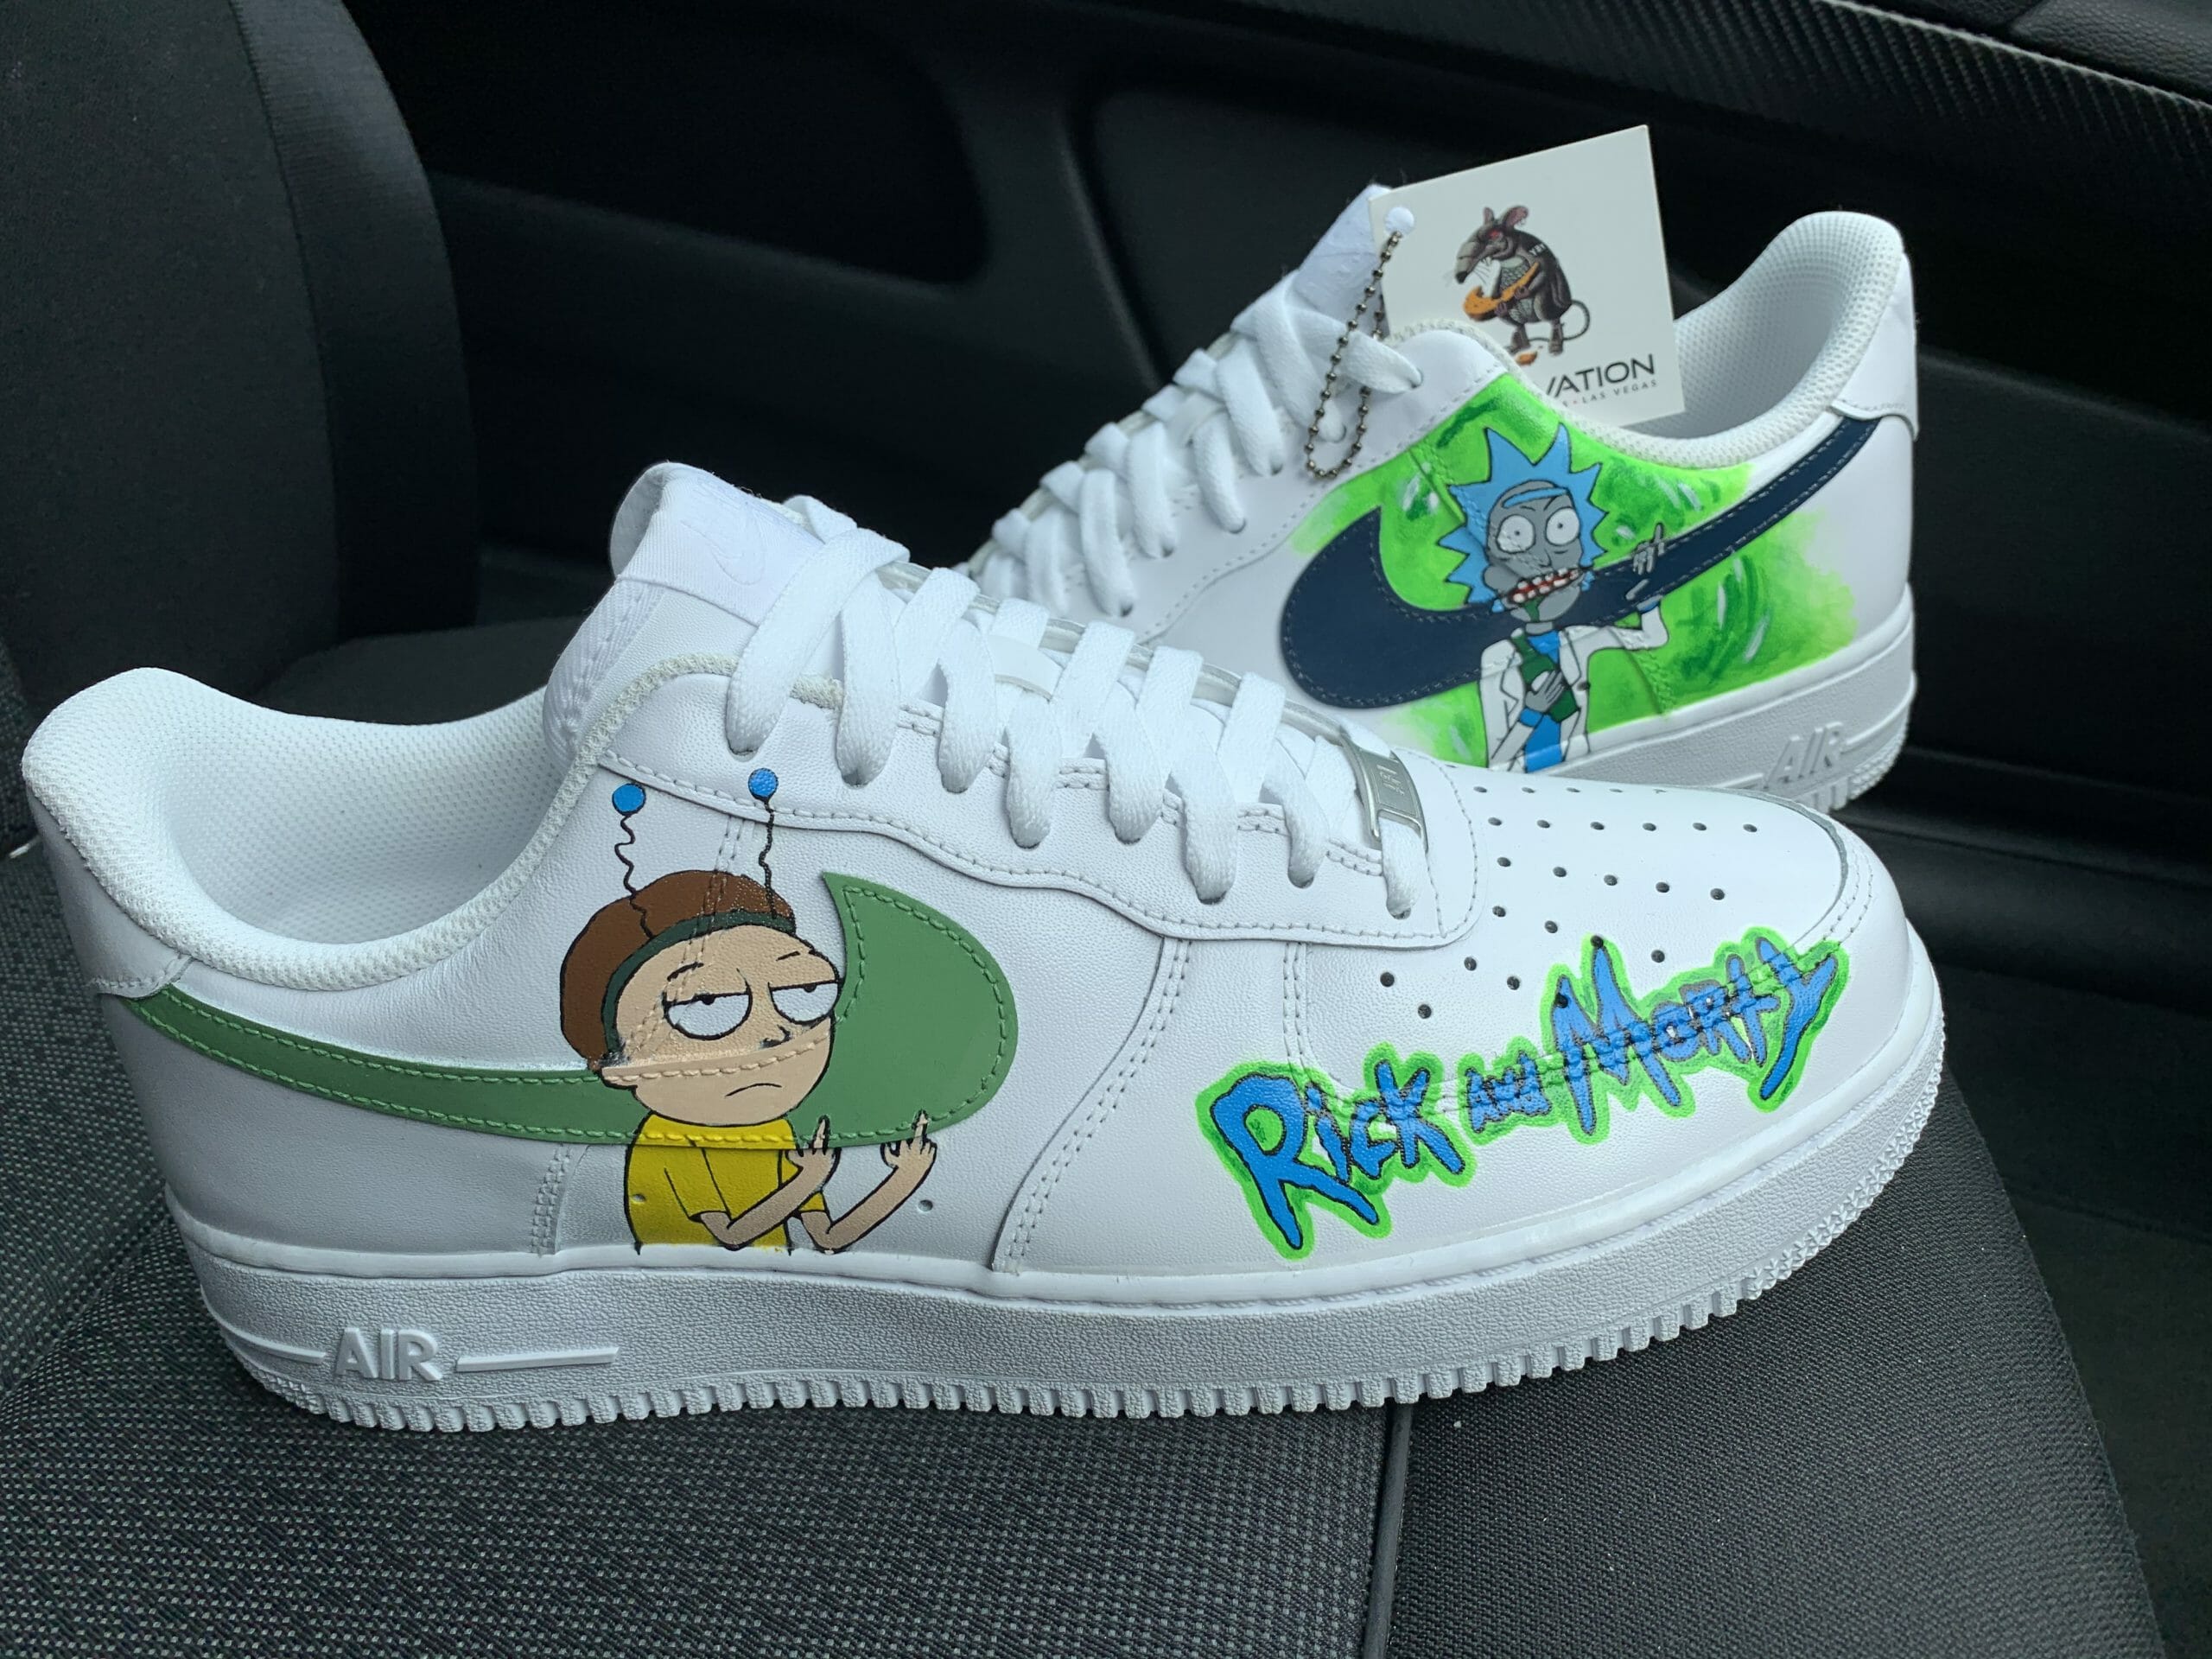 CUSTOM RICK AND MORTY AIR FORCE 1 